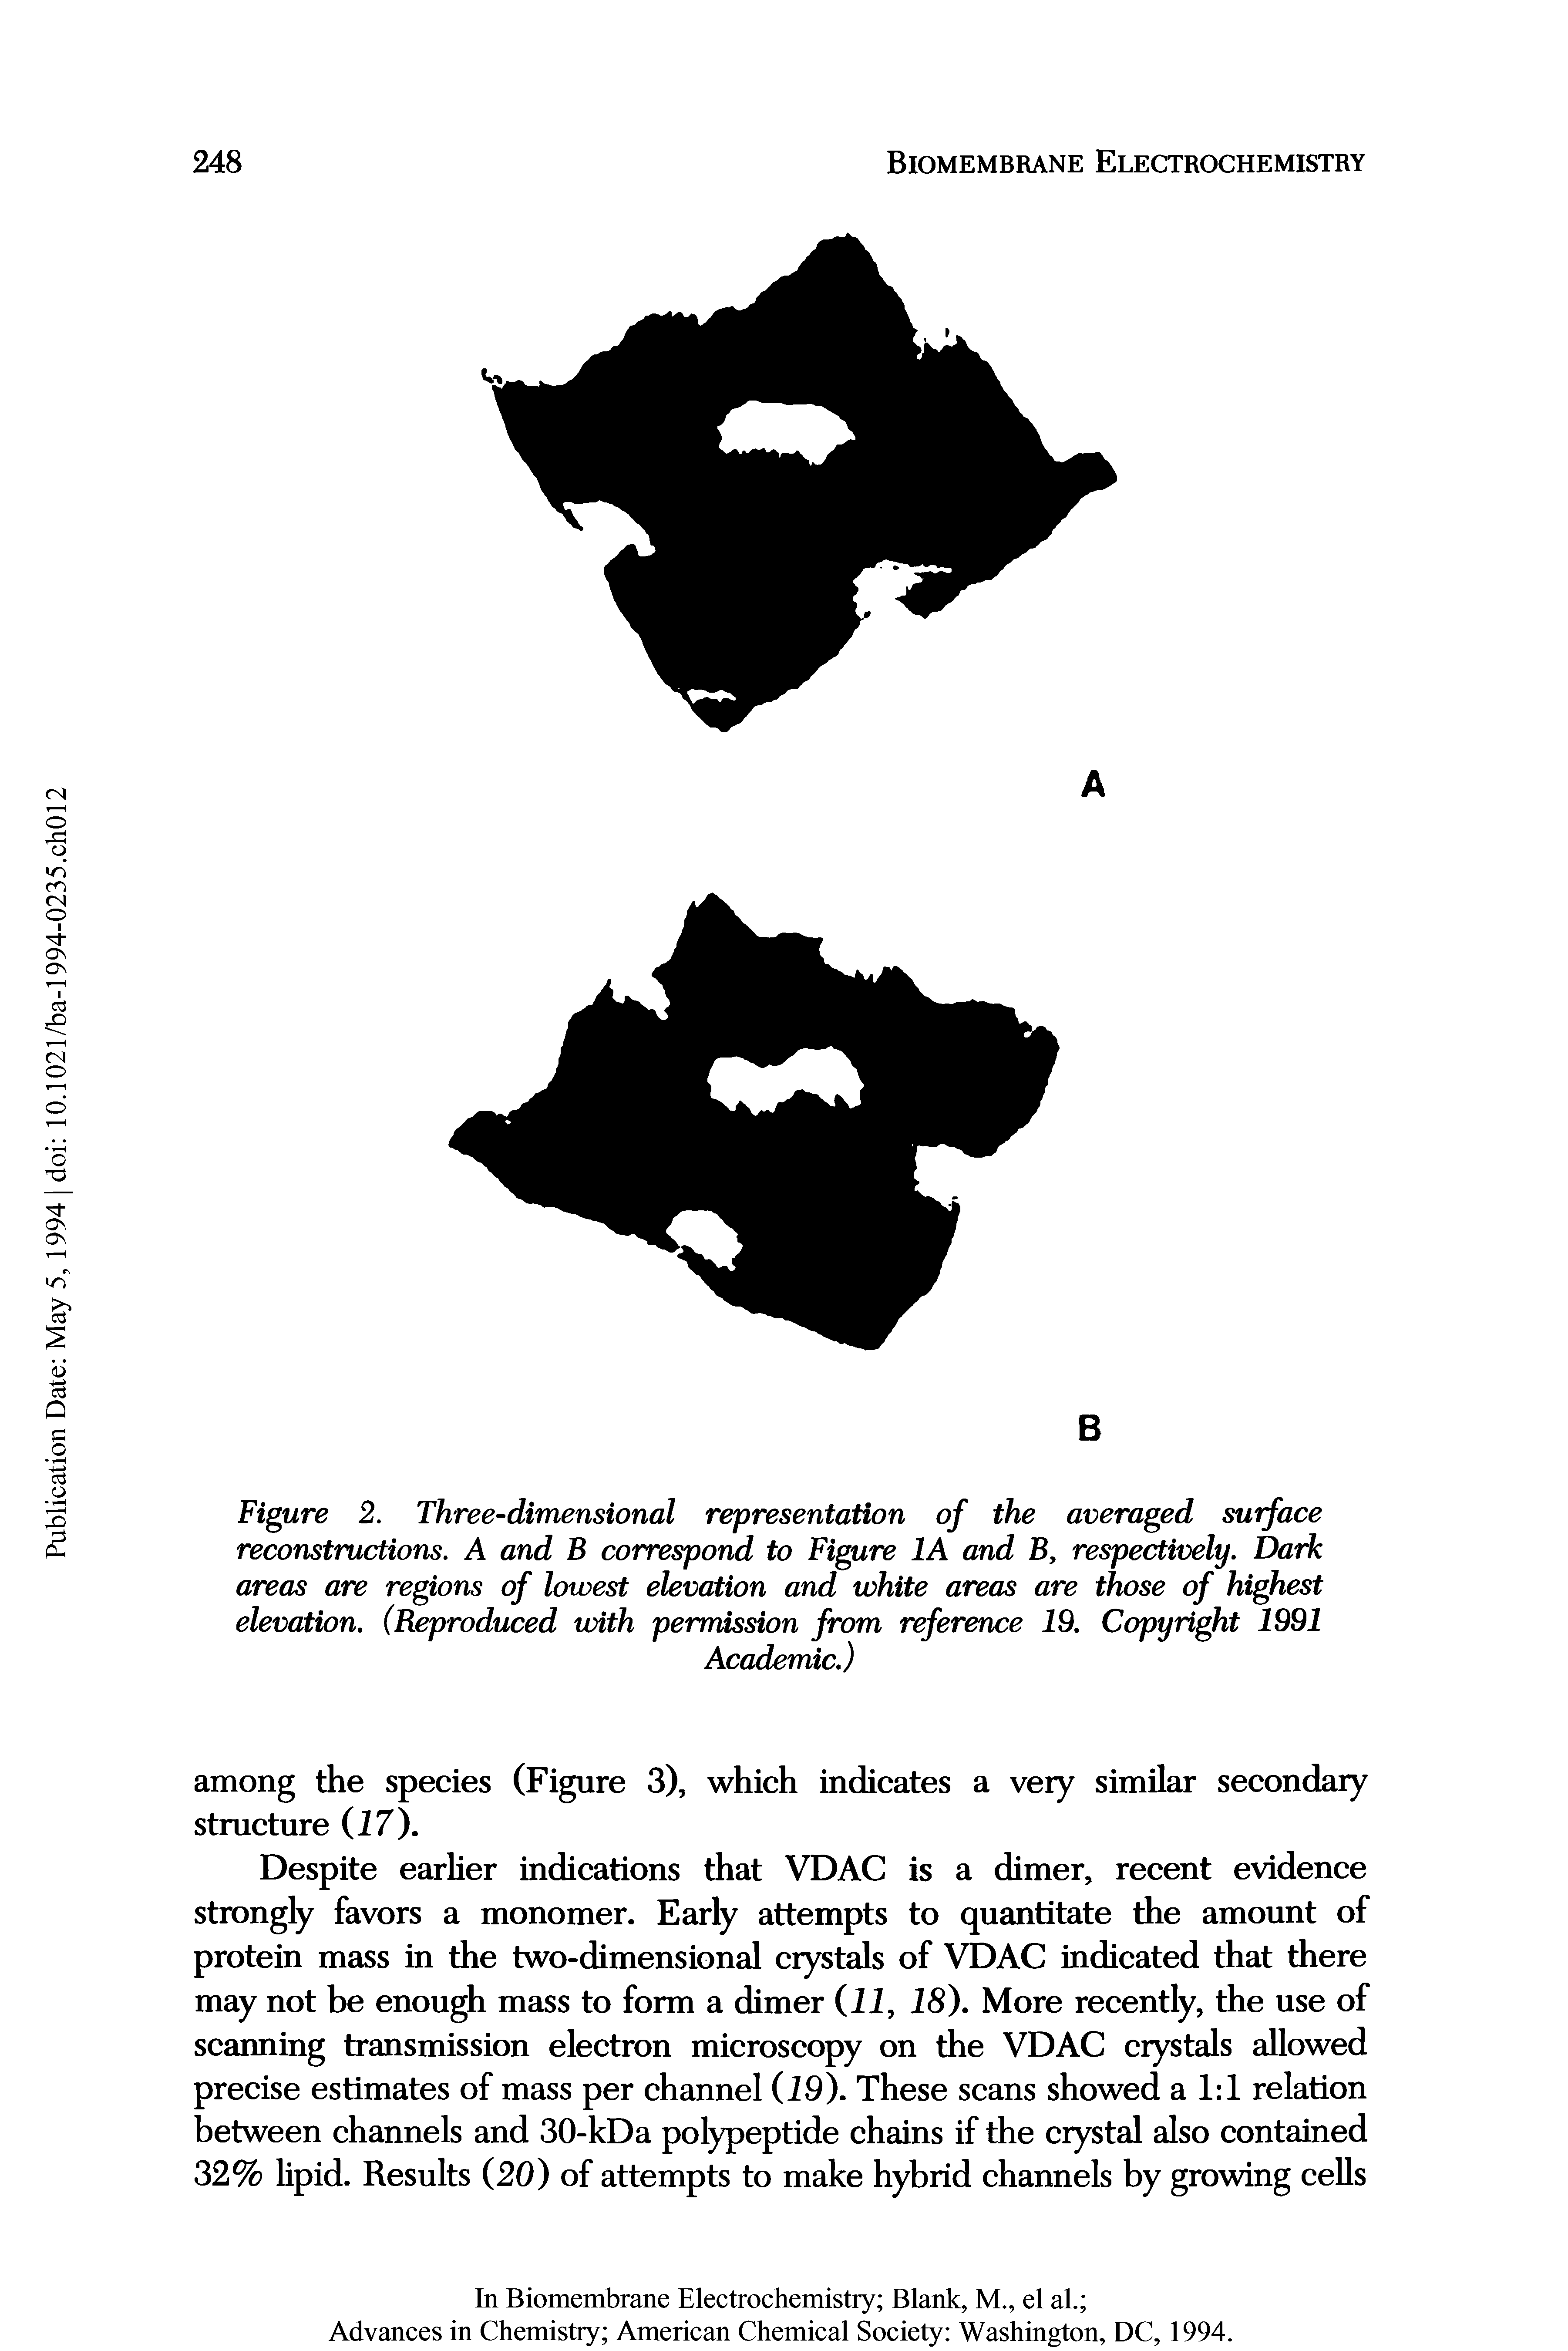 Figure 2. Three-dimensional representation of the averaged surface reconstructions. A and B correspond to Figure 1A and B, respectively. Dark areas are regions of lowest elevation and white areas are those of highest elevation. (Reproduced with permission from reference 19. Copyright 1991...